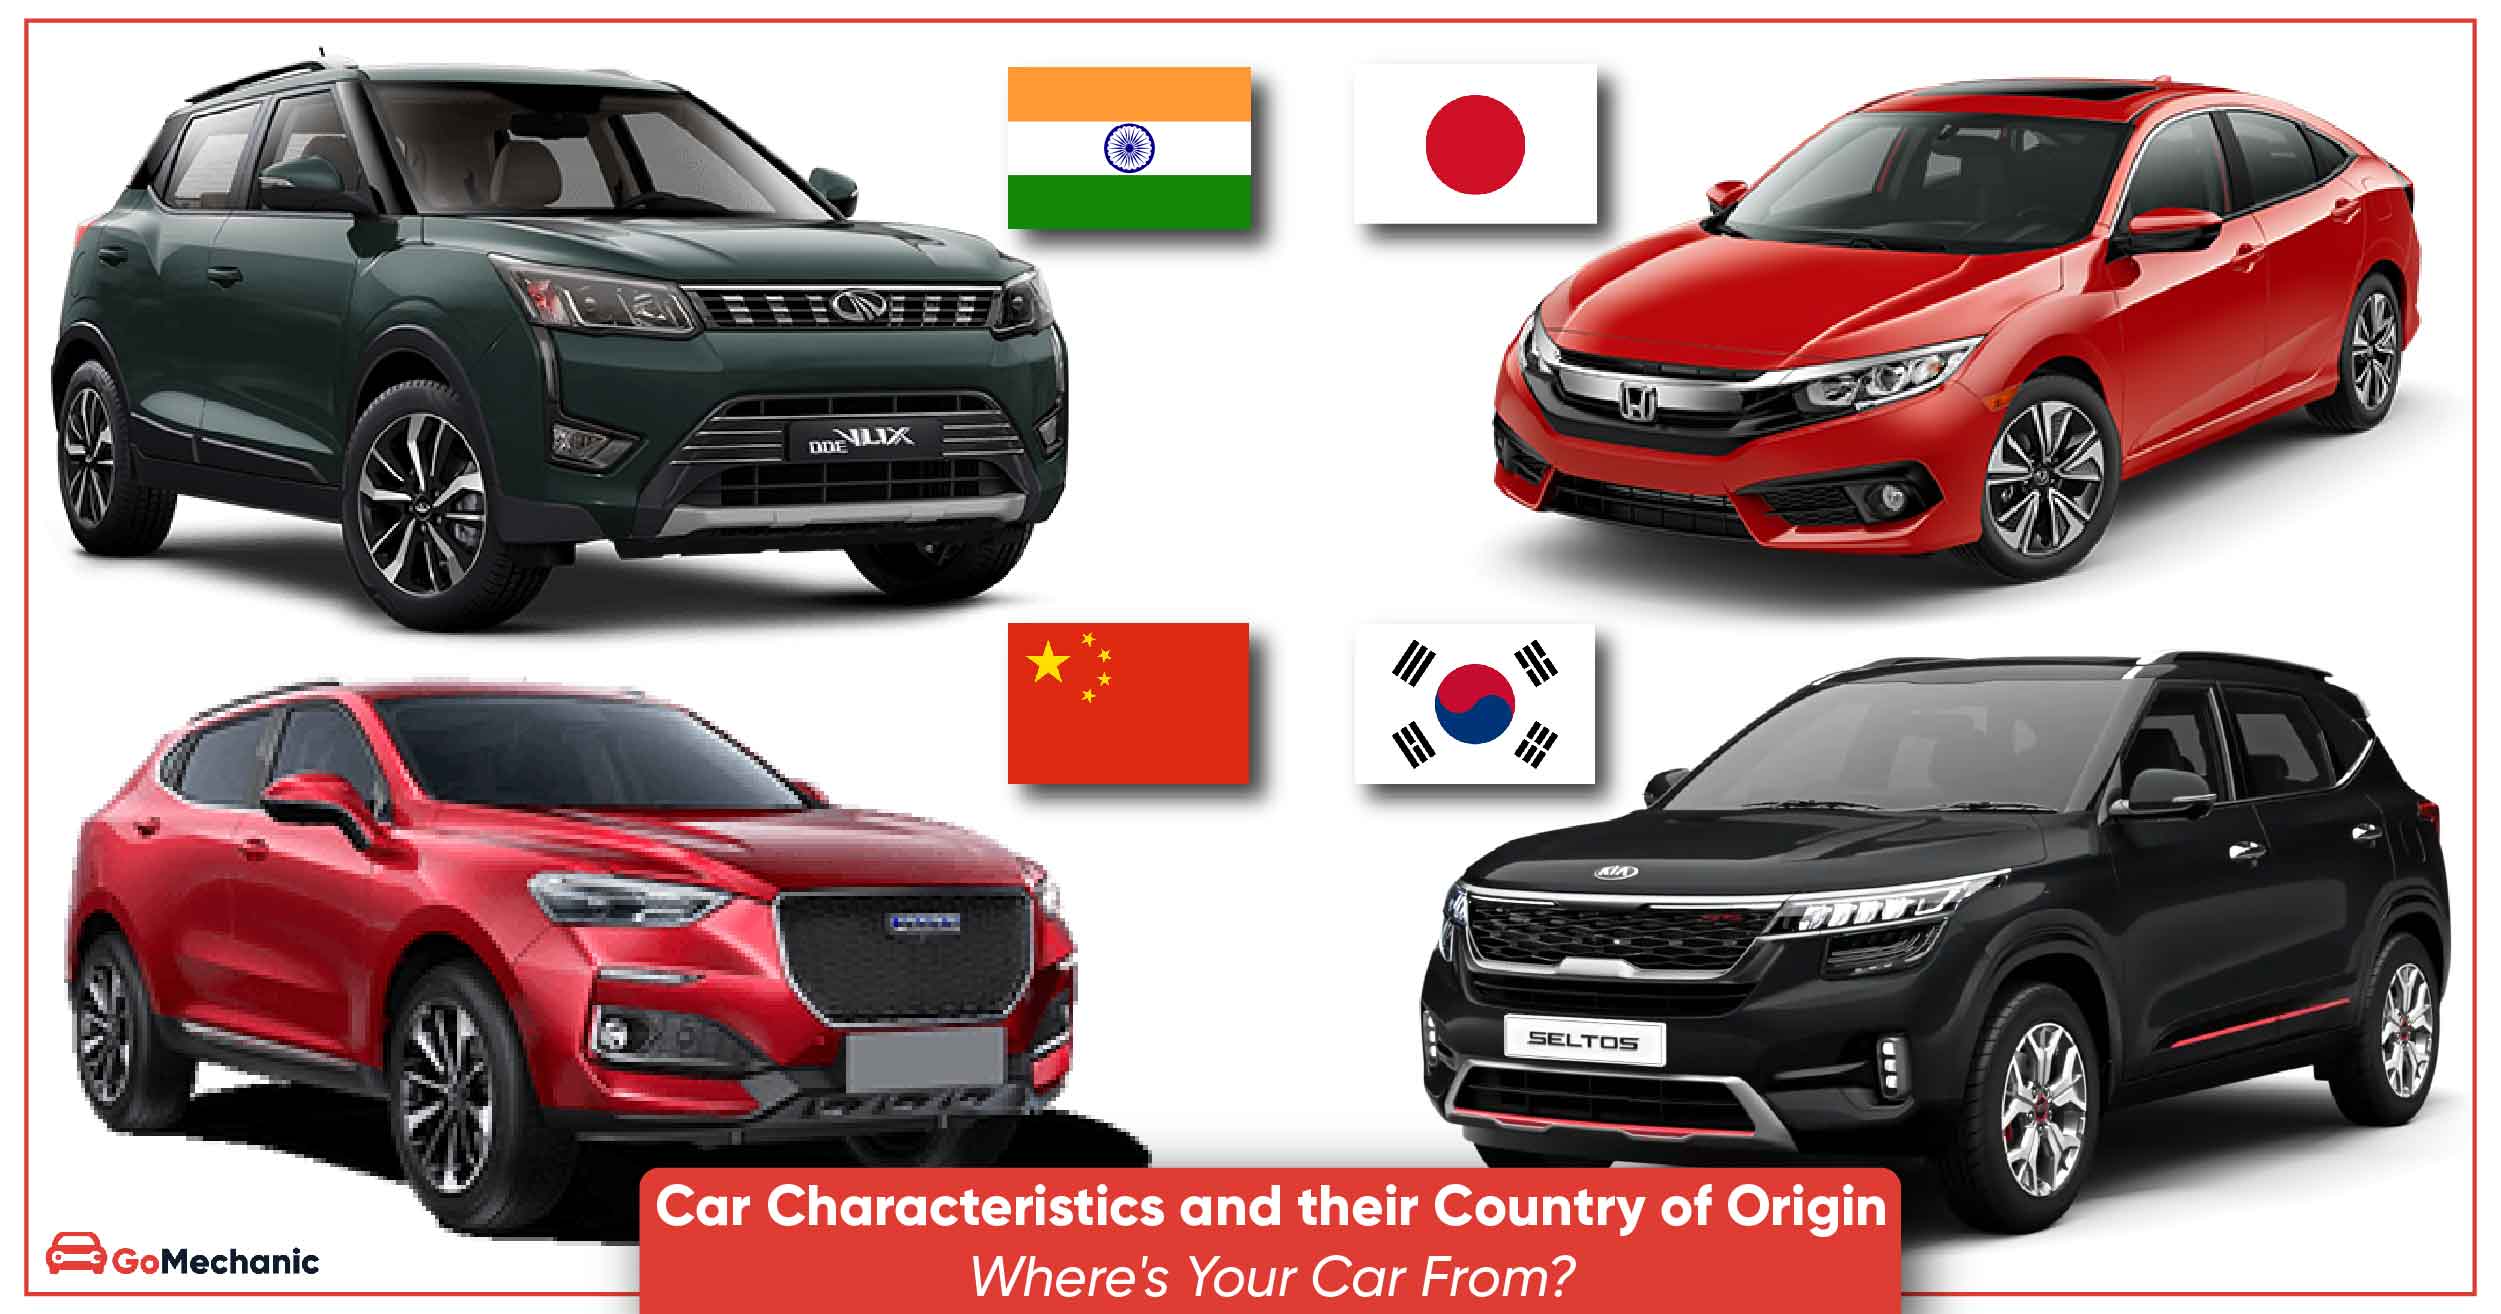 Car Characteristics and their Country of Origin: Where's Your Car From?